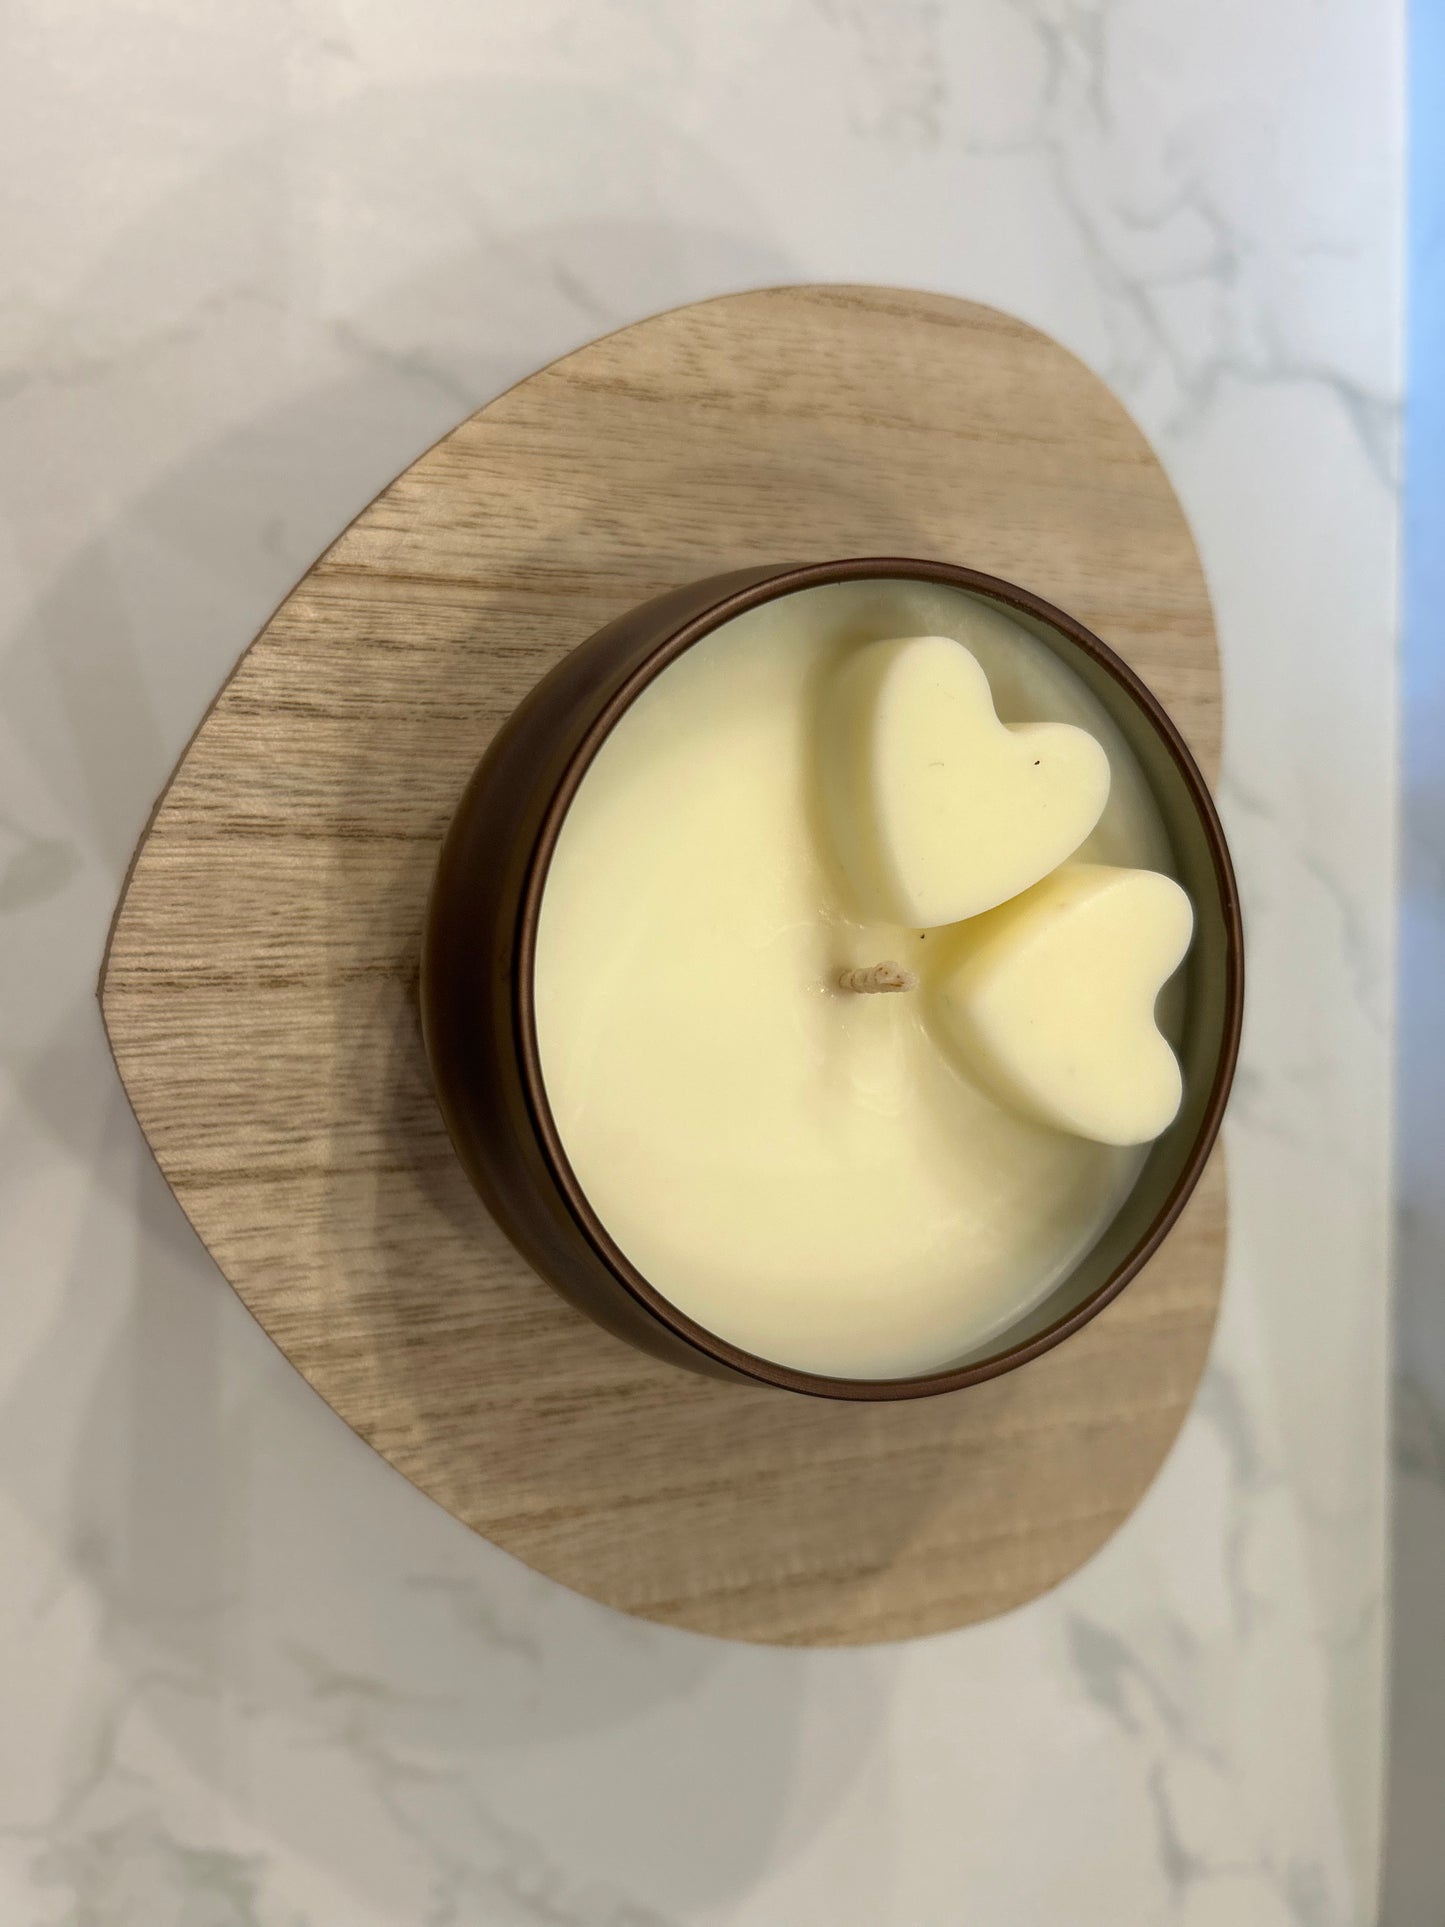 Grapefruit & Apple Soy Candle